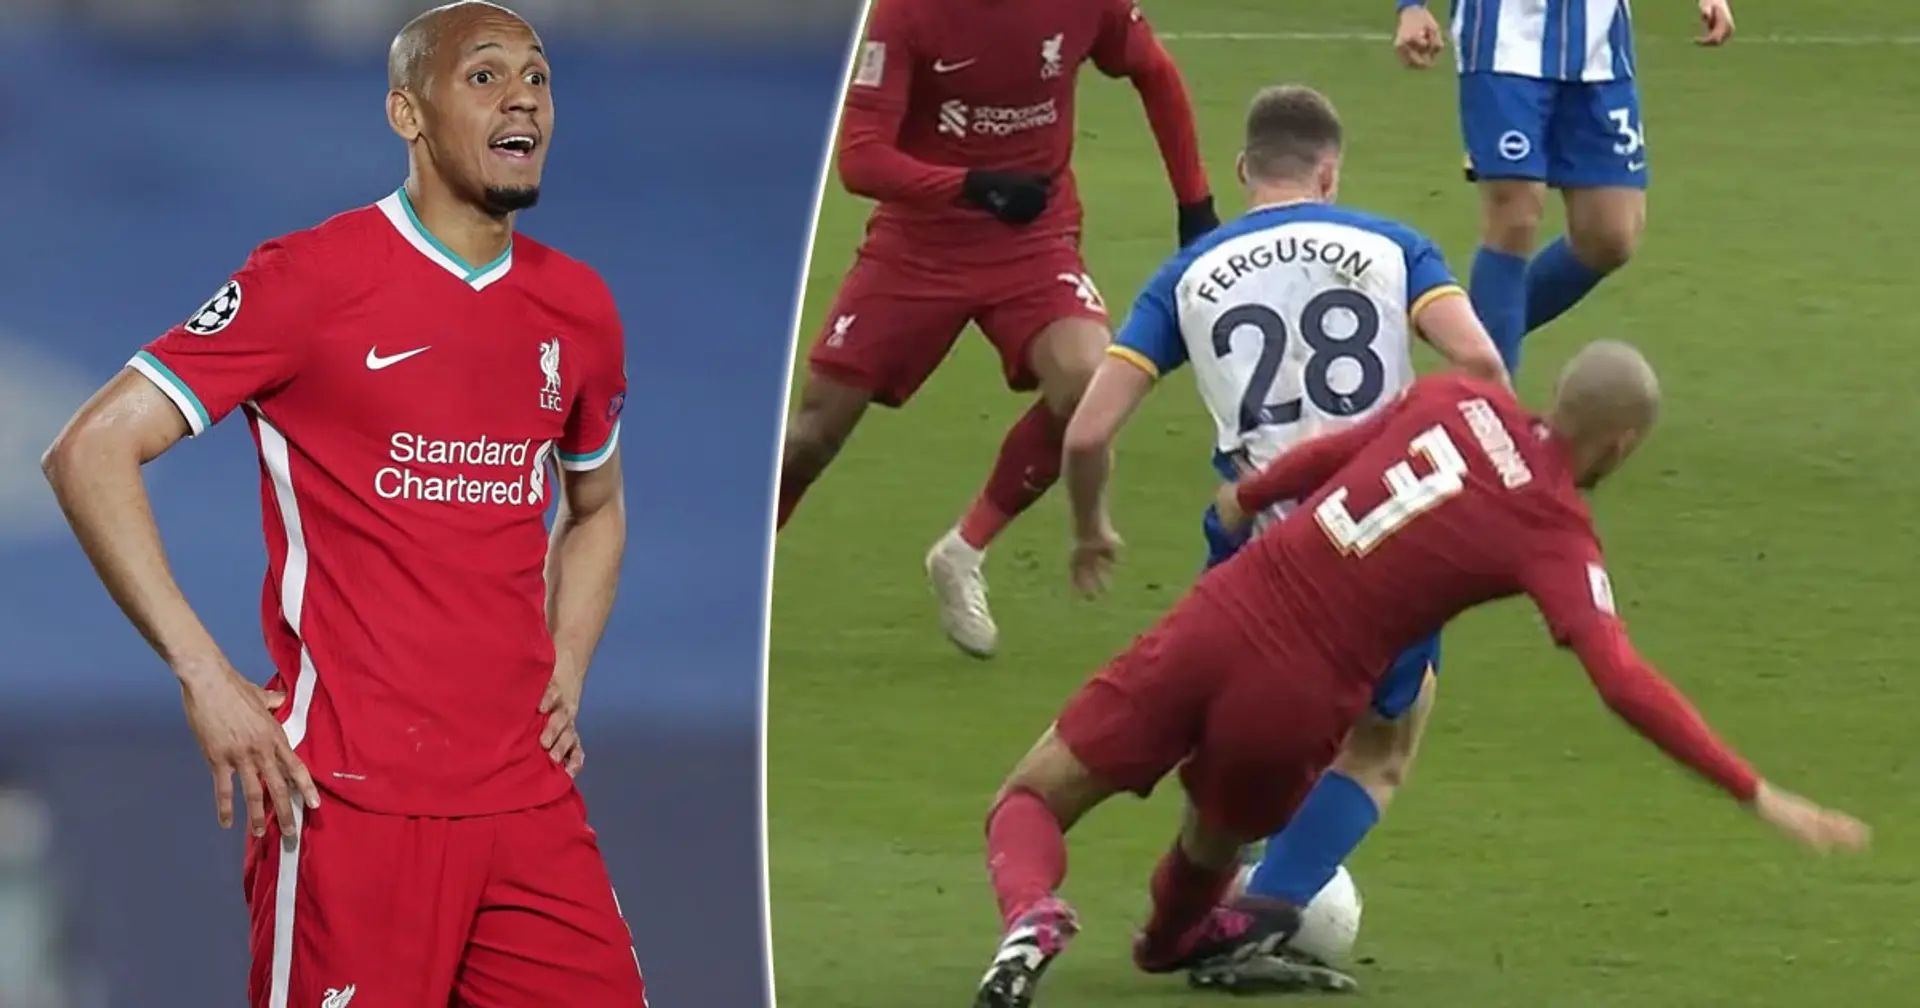 'One of the worst sub appearances': some Liverpool fans think Fabinho should've seen red for awful tackle on Brighton man Ferguson